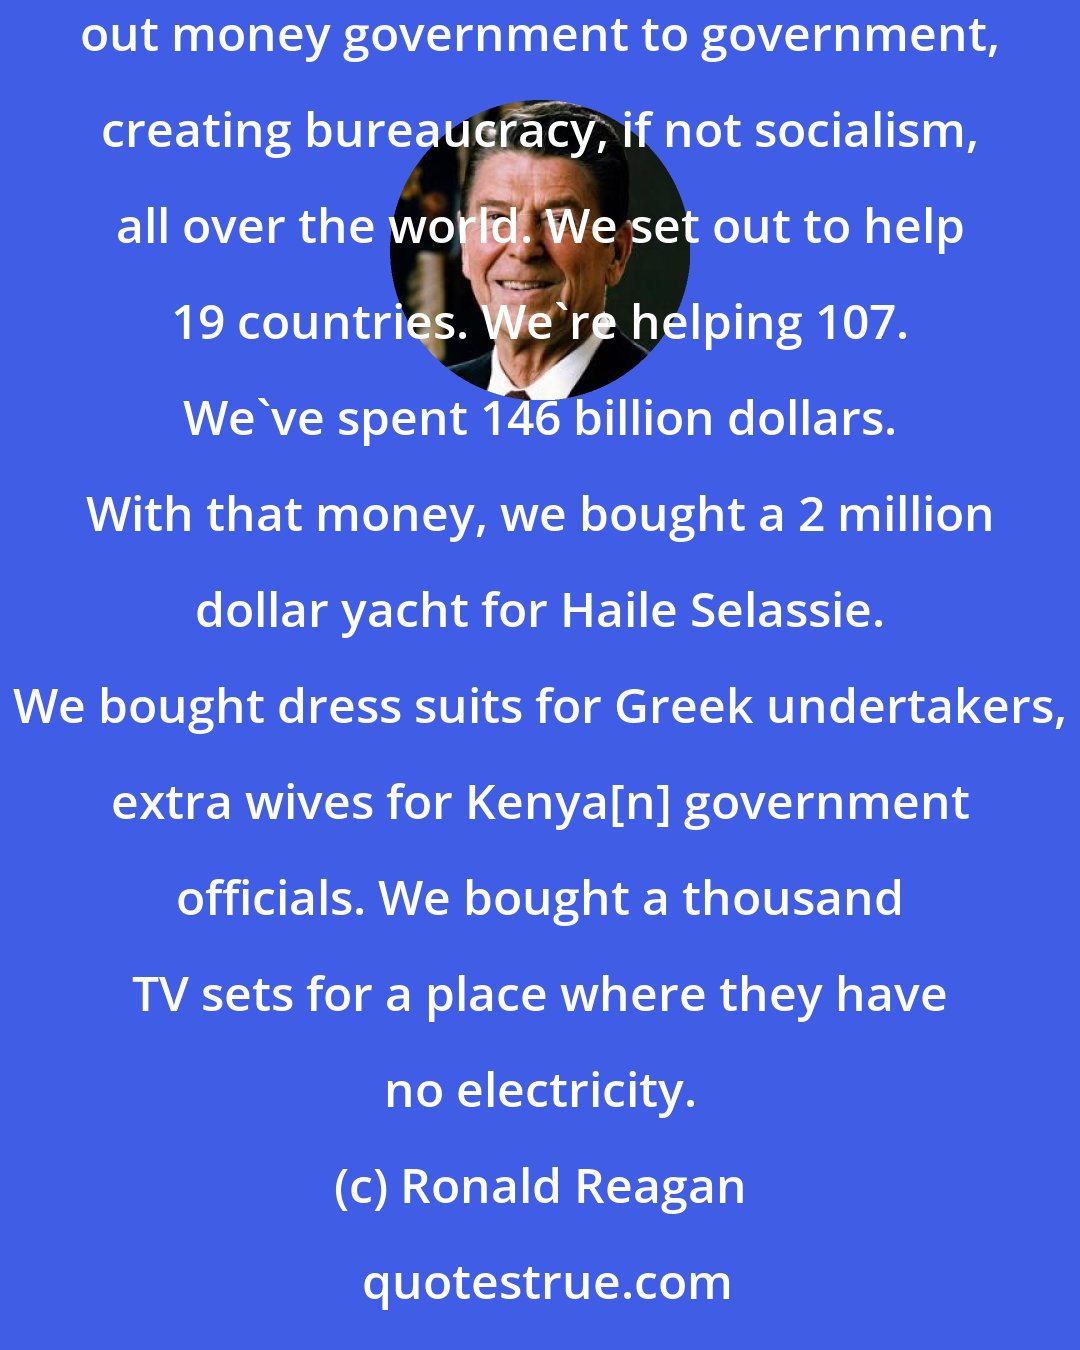 Ronald Reagan: We are for aiding our allies by sharing of our material blessings with those nations which share in our fundamental beliefs, but we're against doling out money government to government, creating bureaucracy, if not socialism, all over the world. We set out to help 19 countries. We're helping 107. We've spent 146 billion dollars. With that money, we bought a 2 million dollar yacht for Haile Selassie. We bought dress suits for Greek undertakers, extra wives for Kenya[n] government officials. We bought a thousand TV sets for a place where they have no electricity.